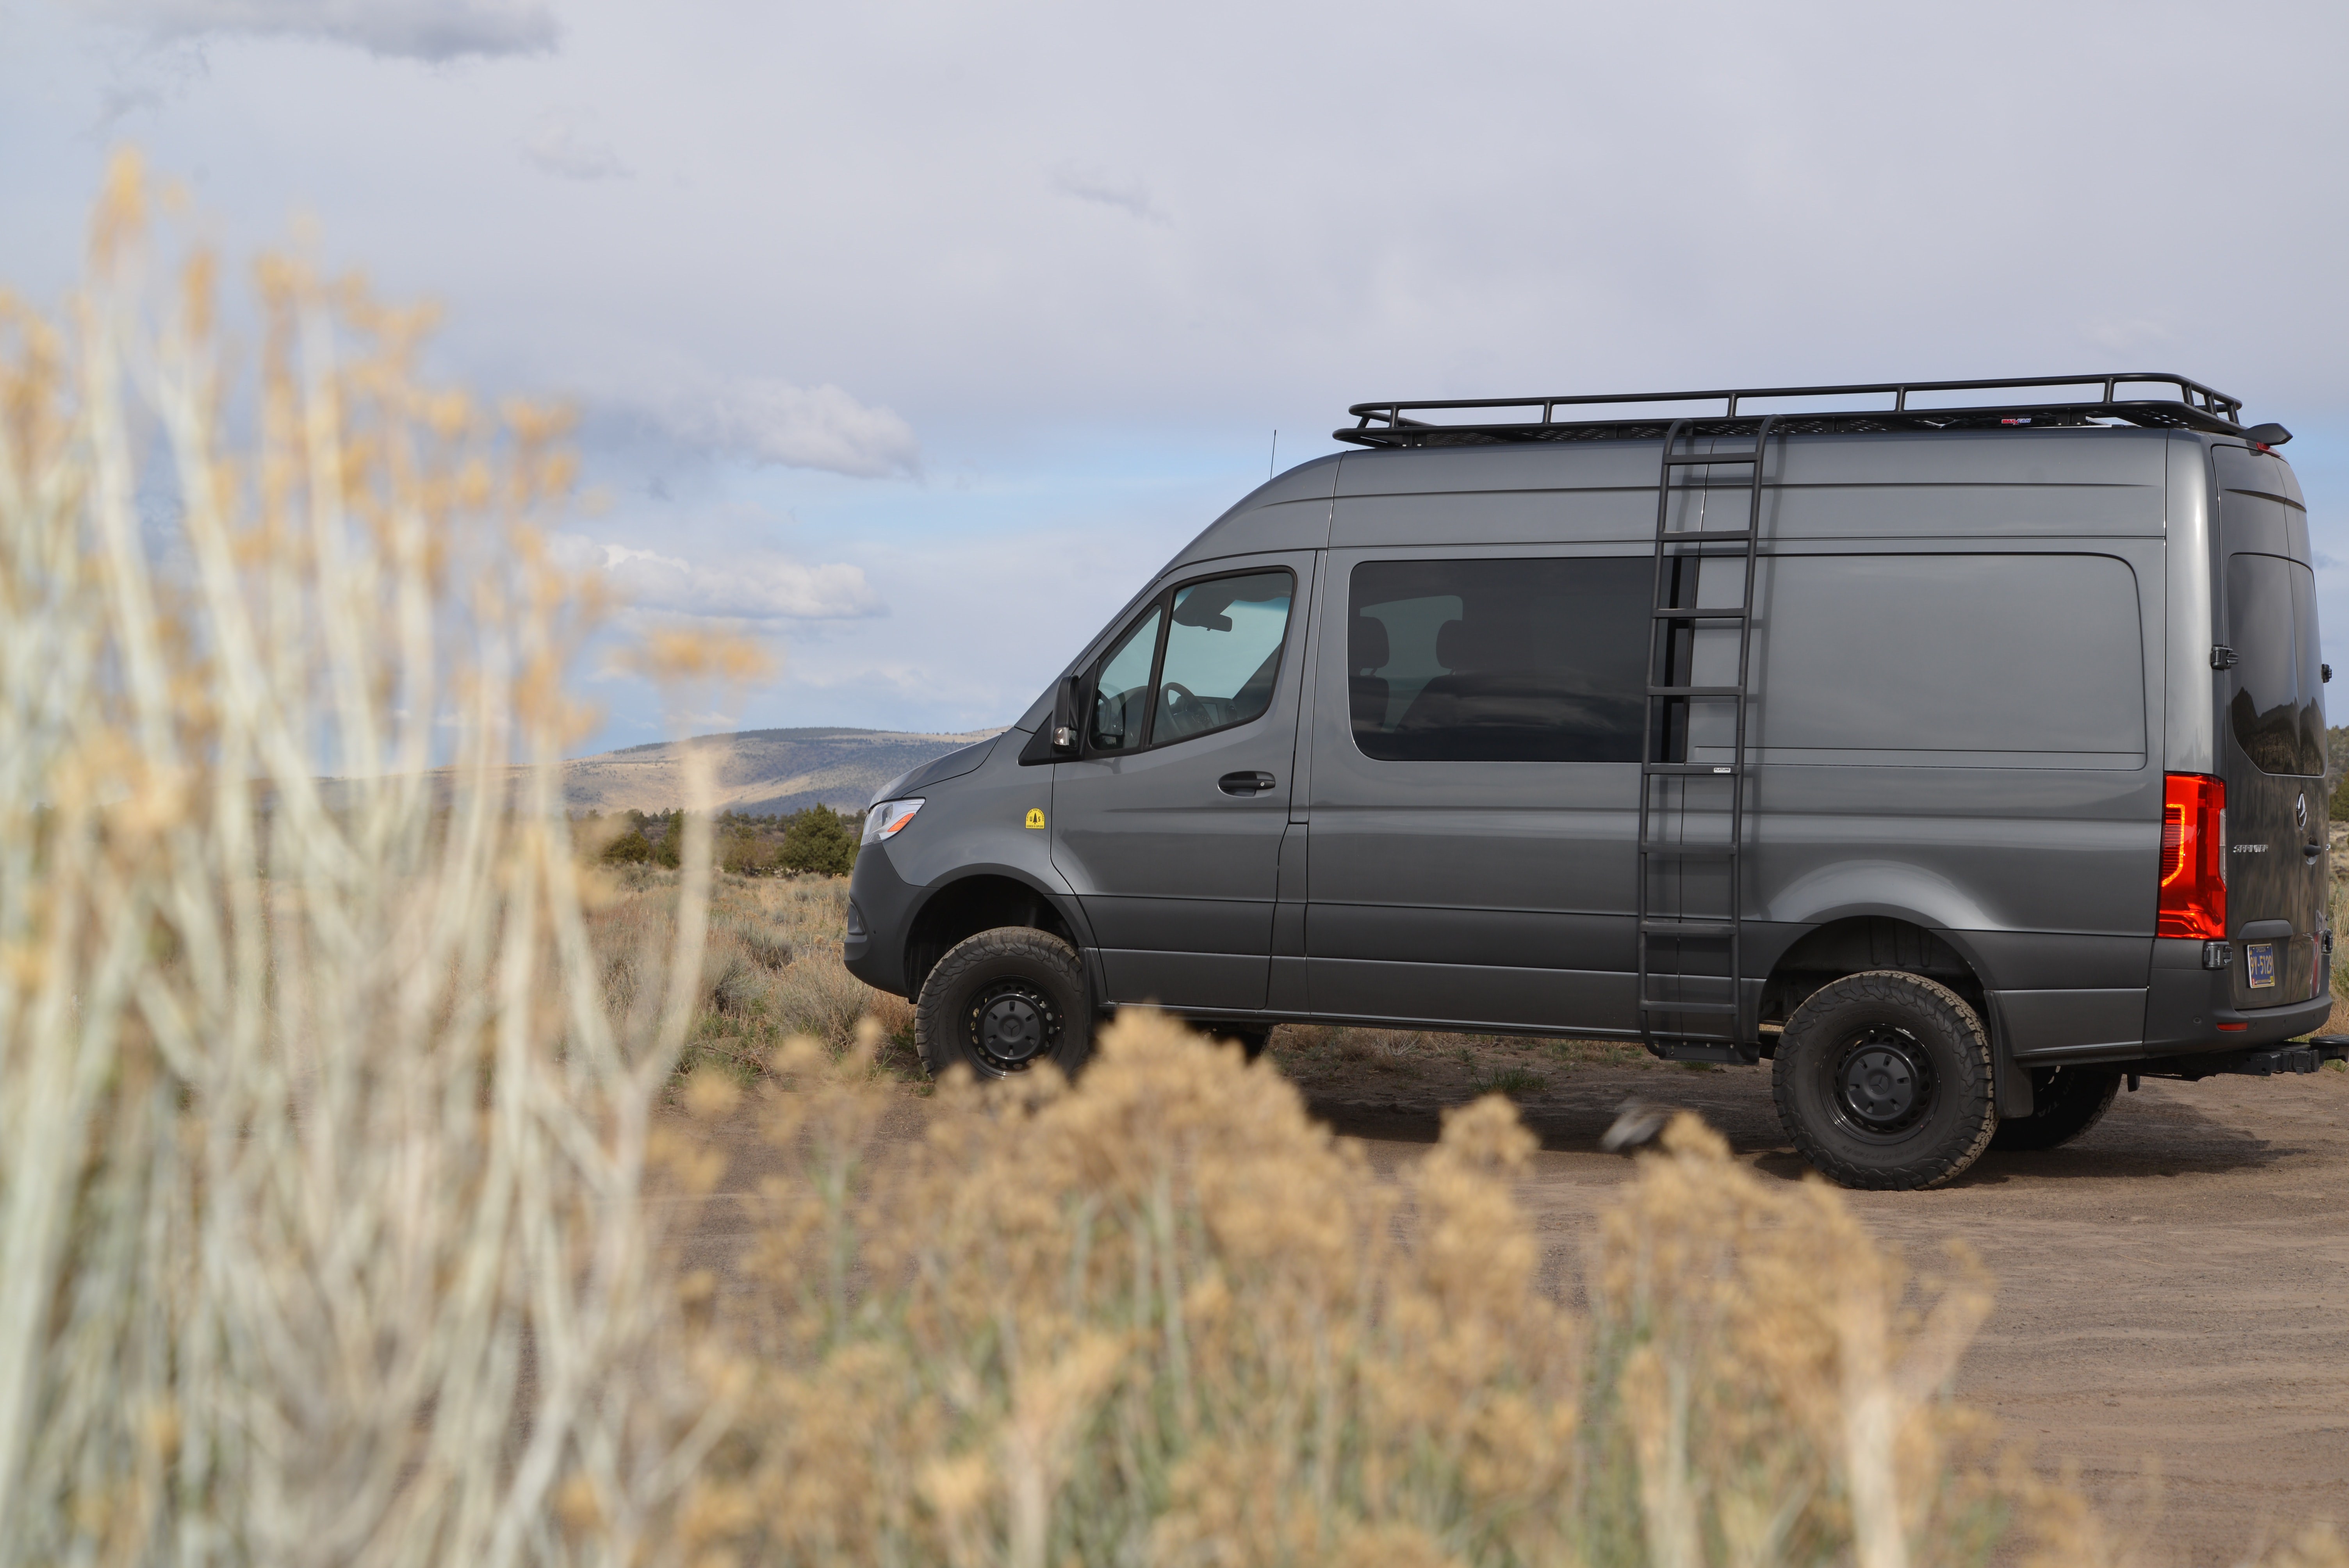 How to protect your business from van theft: 8 top tips
